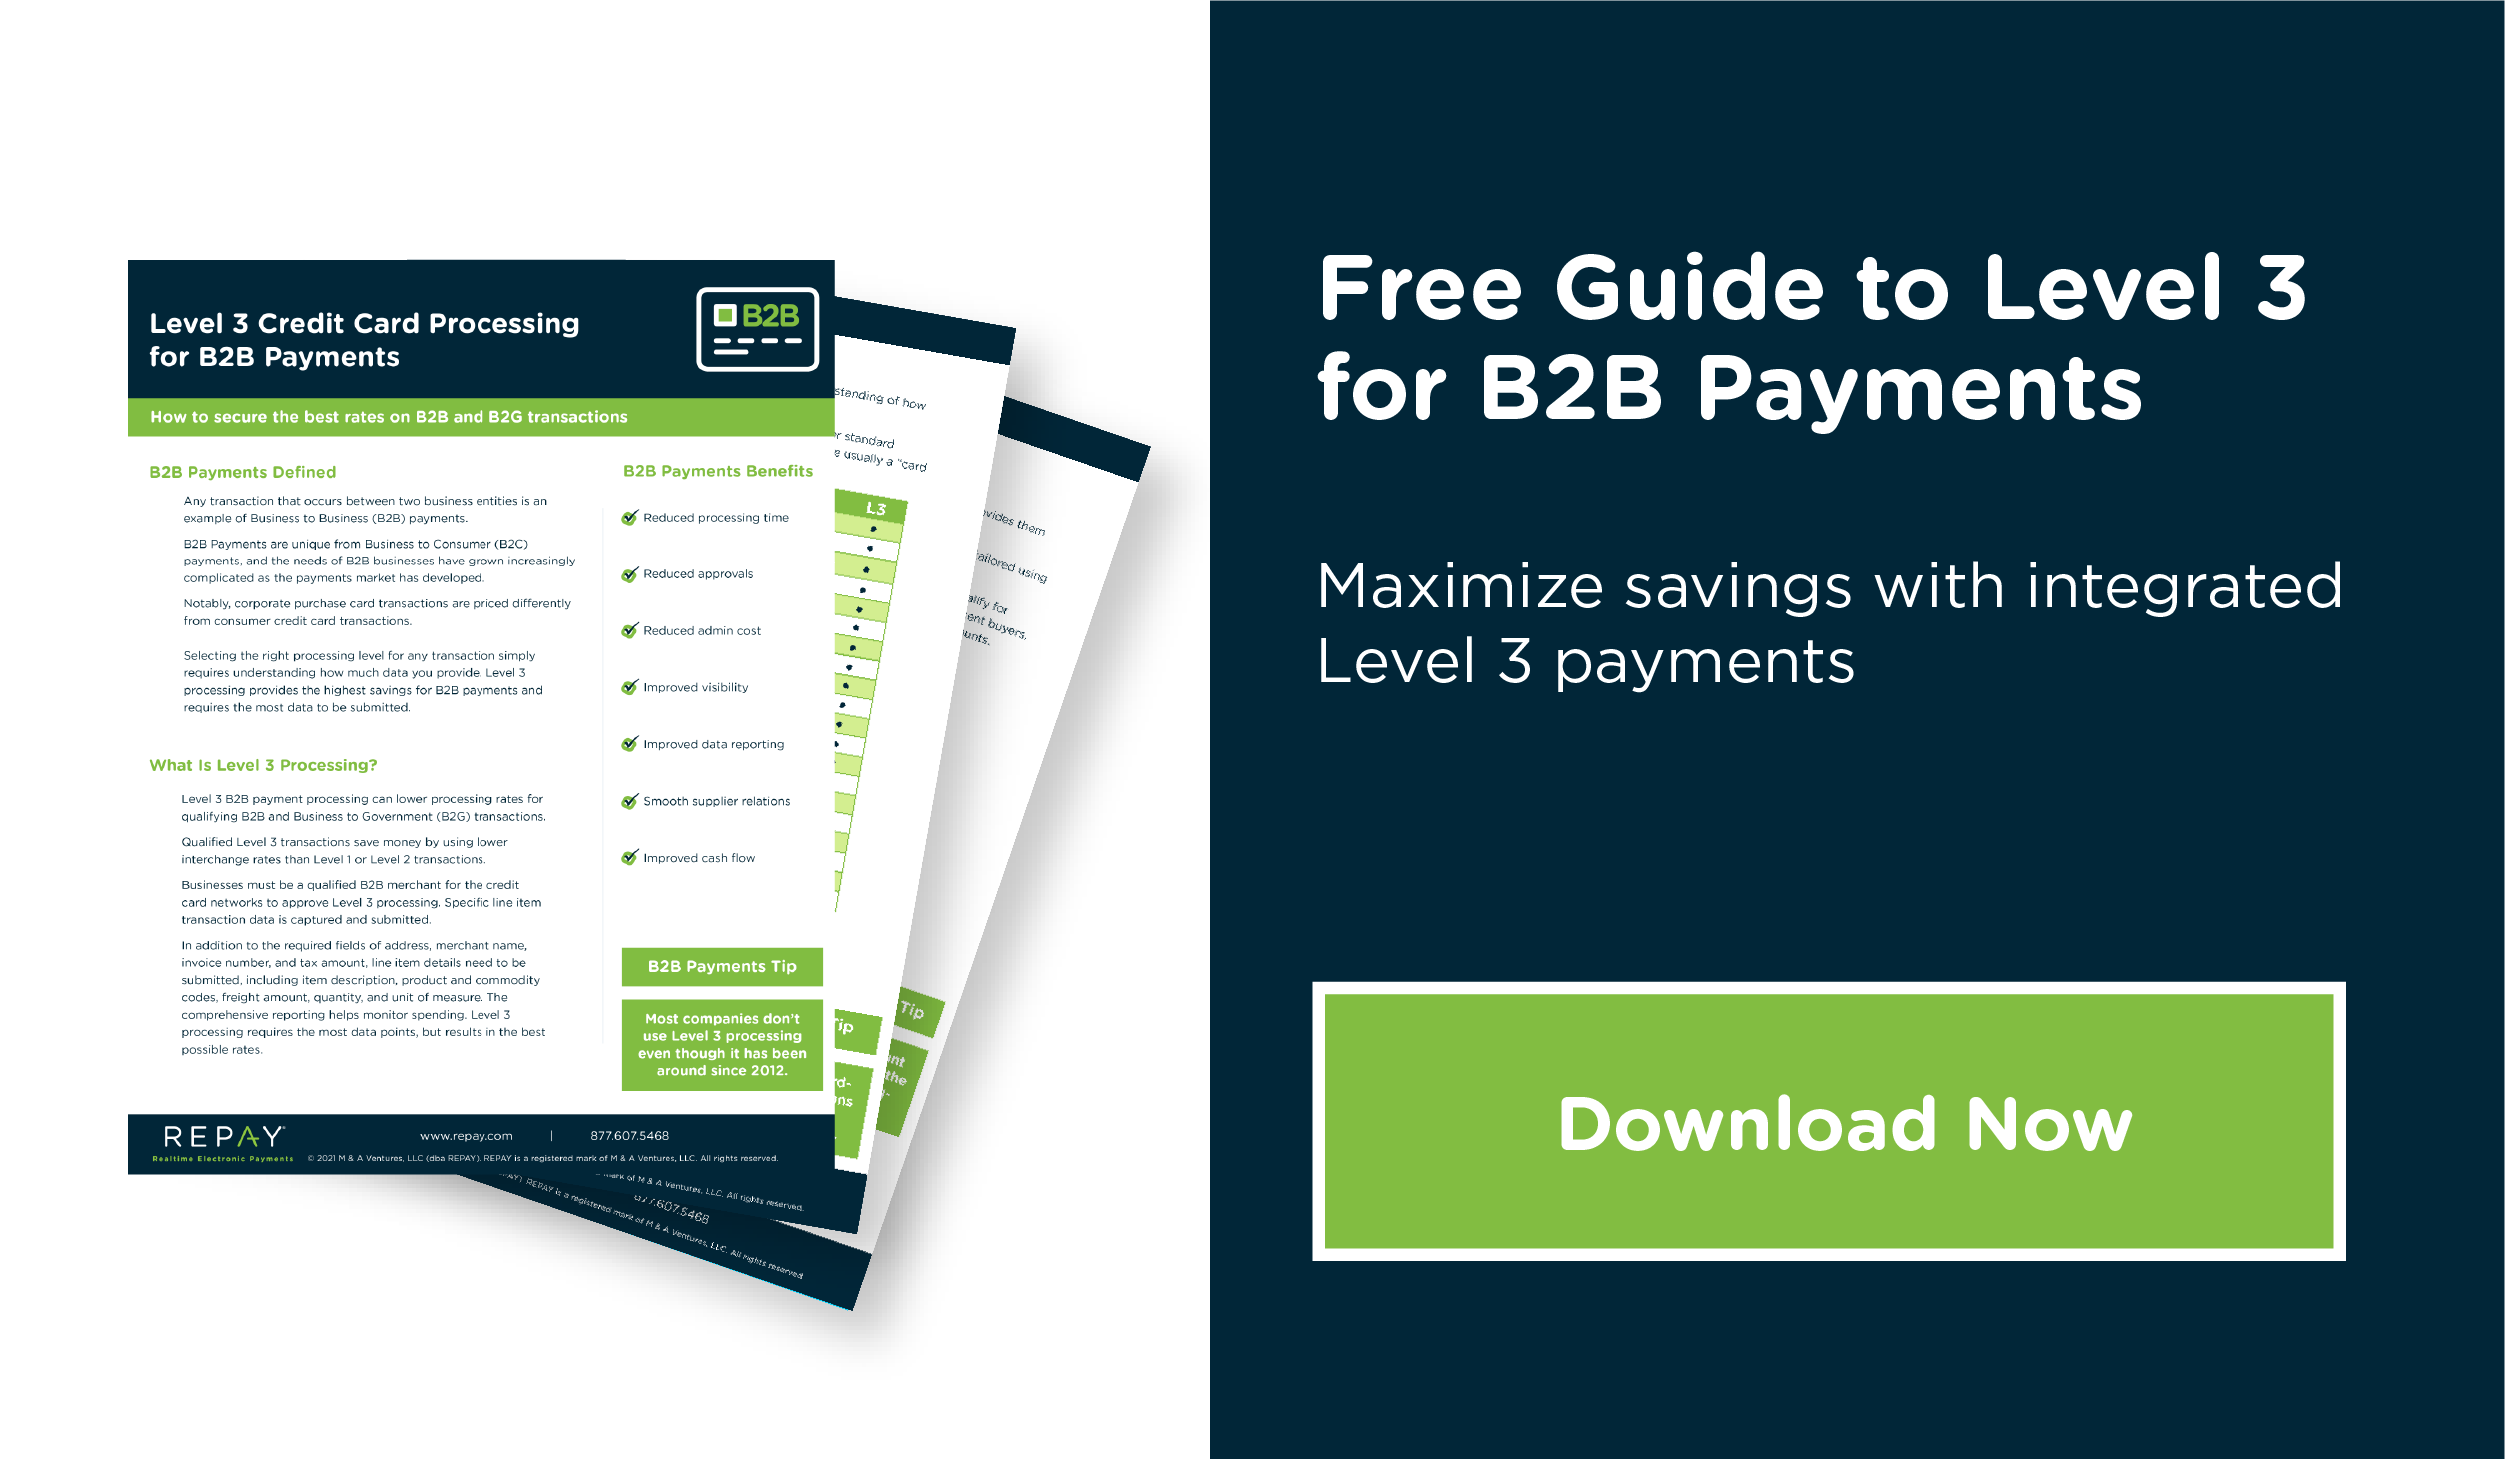 New Guide for B2B Payments - Understanding Level 3 Processing